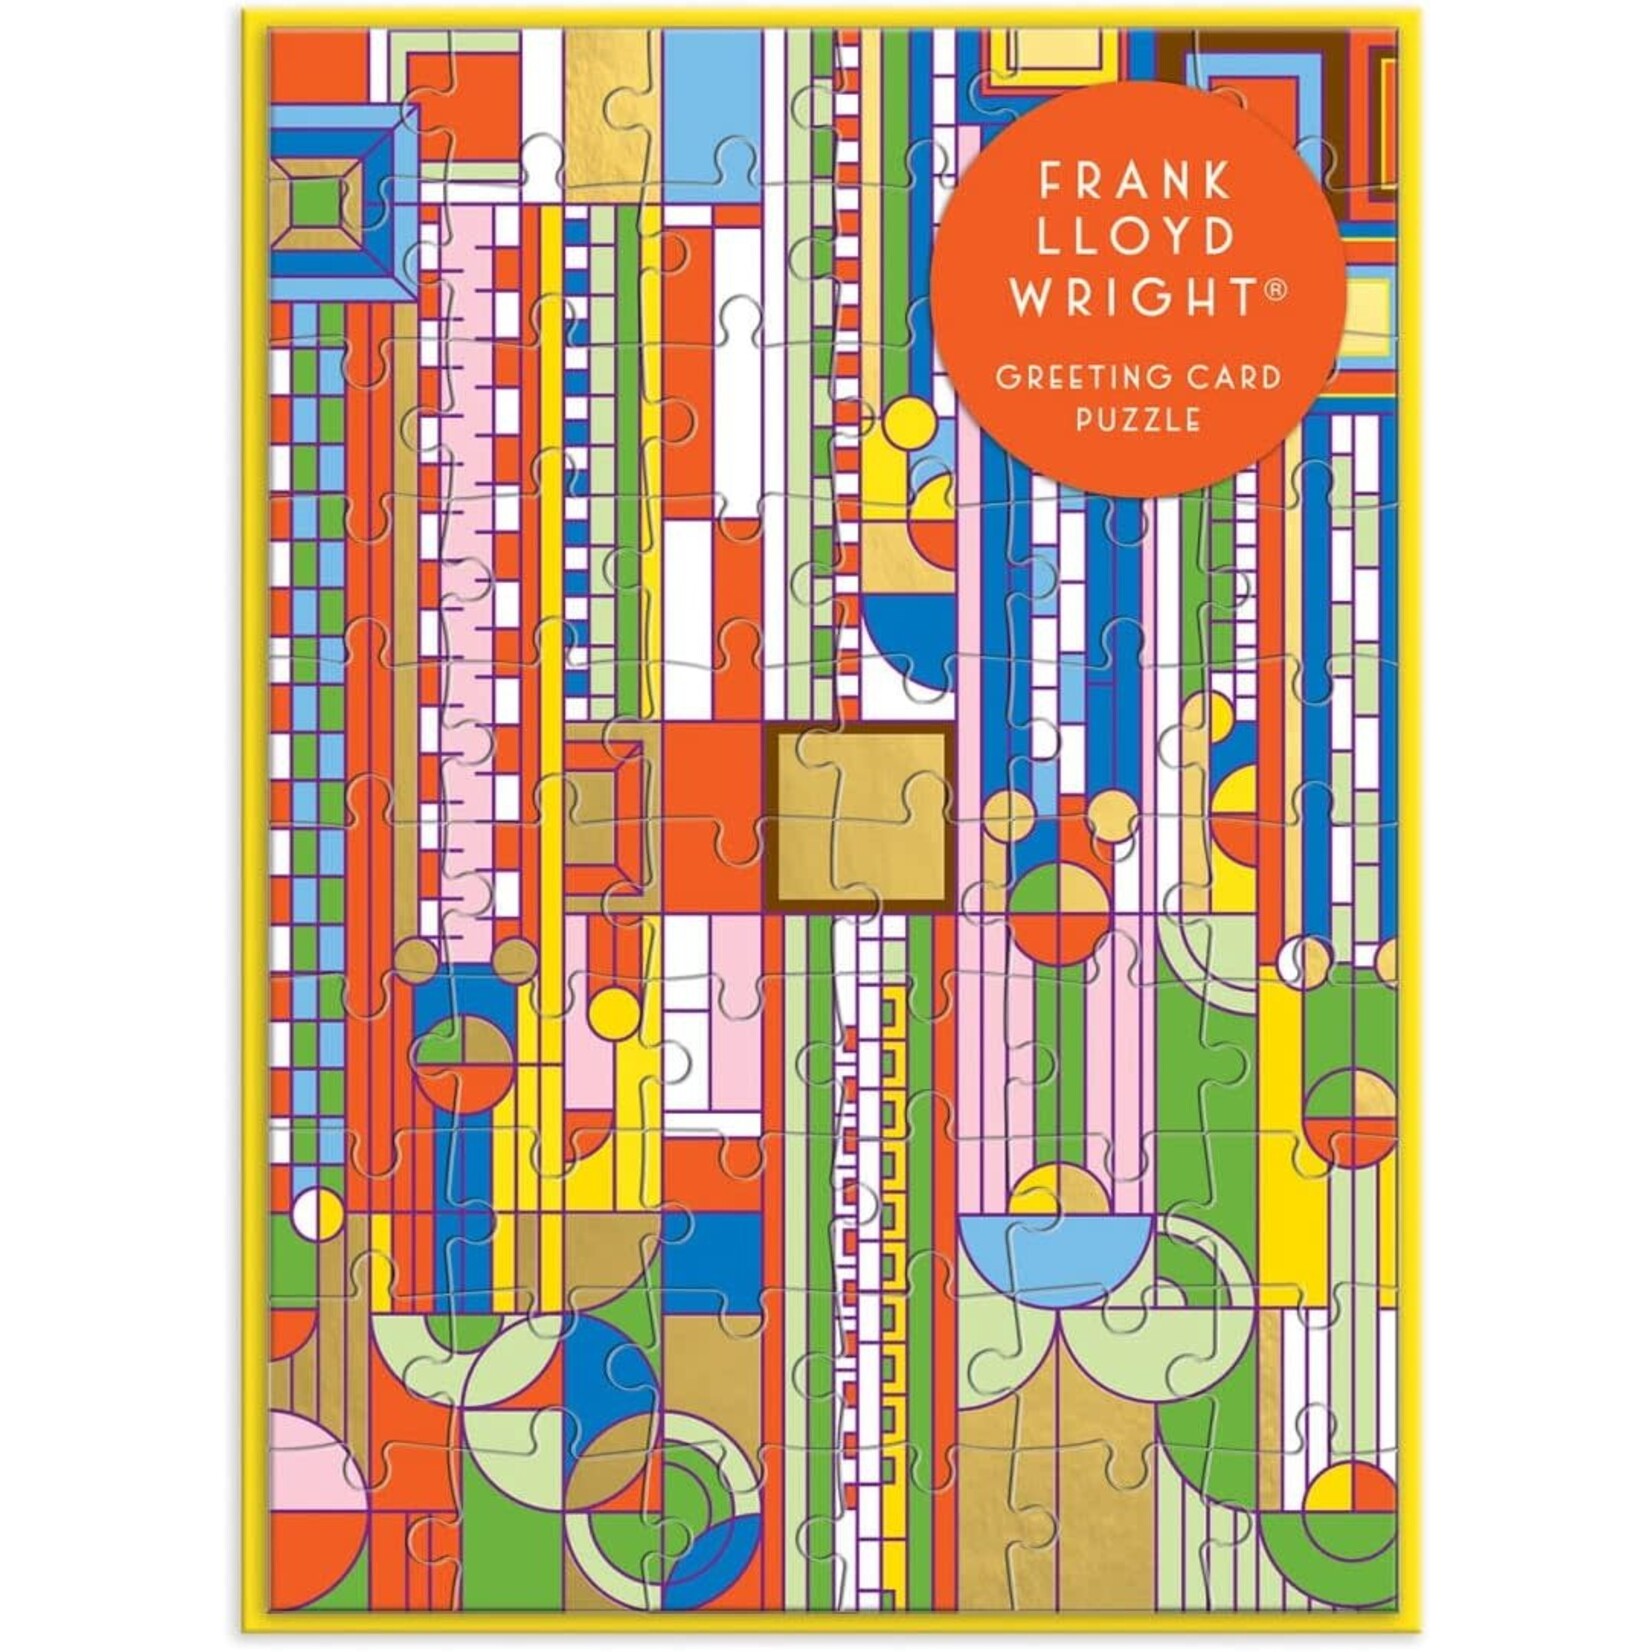 Galison Saguaro Forms & Cactus Flowers by Frank Lloyd Wright, 60-Piece Greeting Card Jigsaw Puzzle